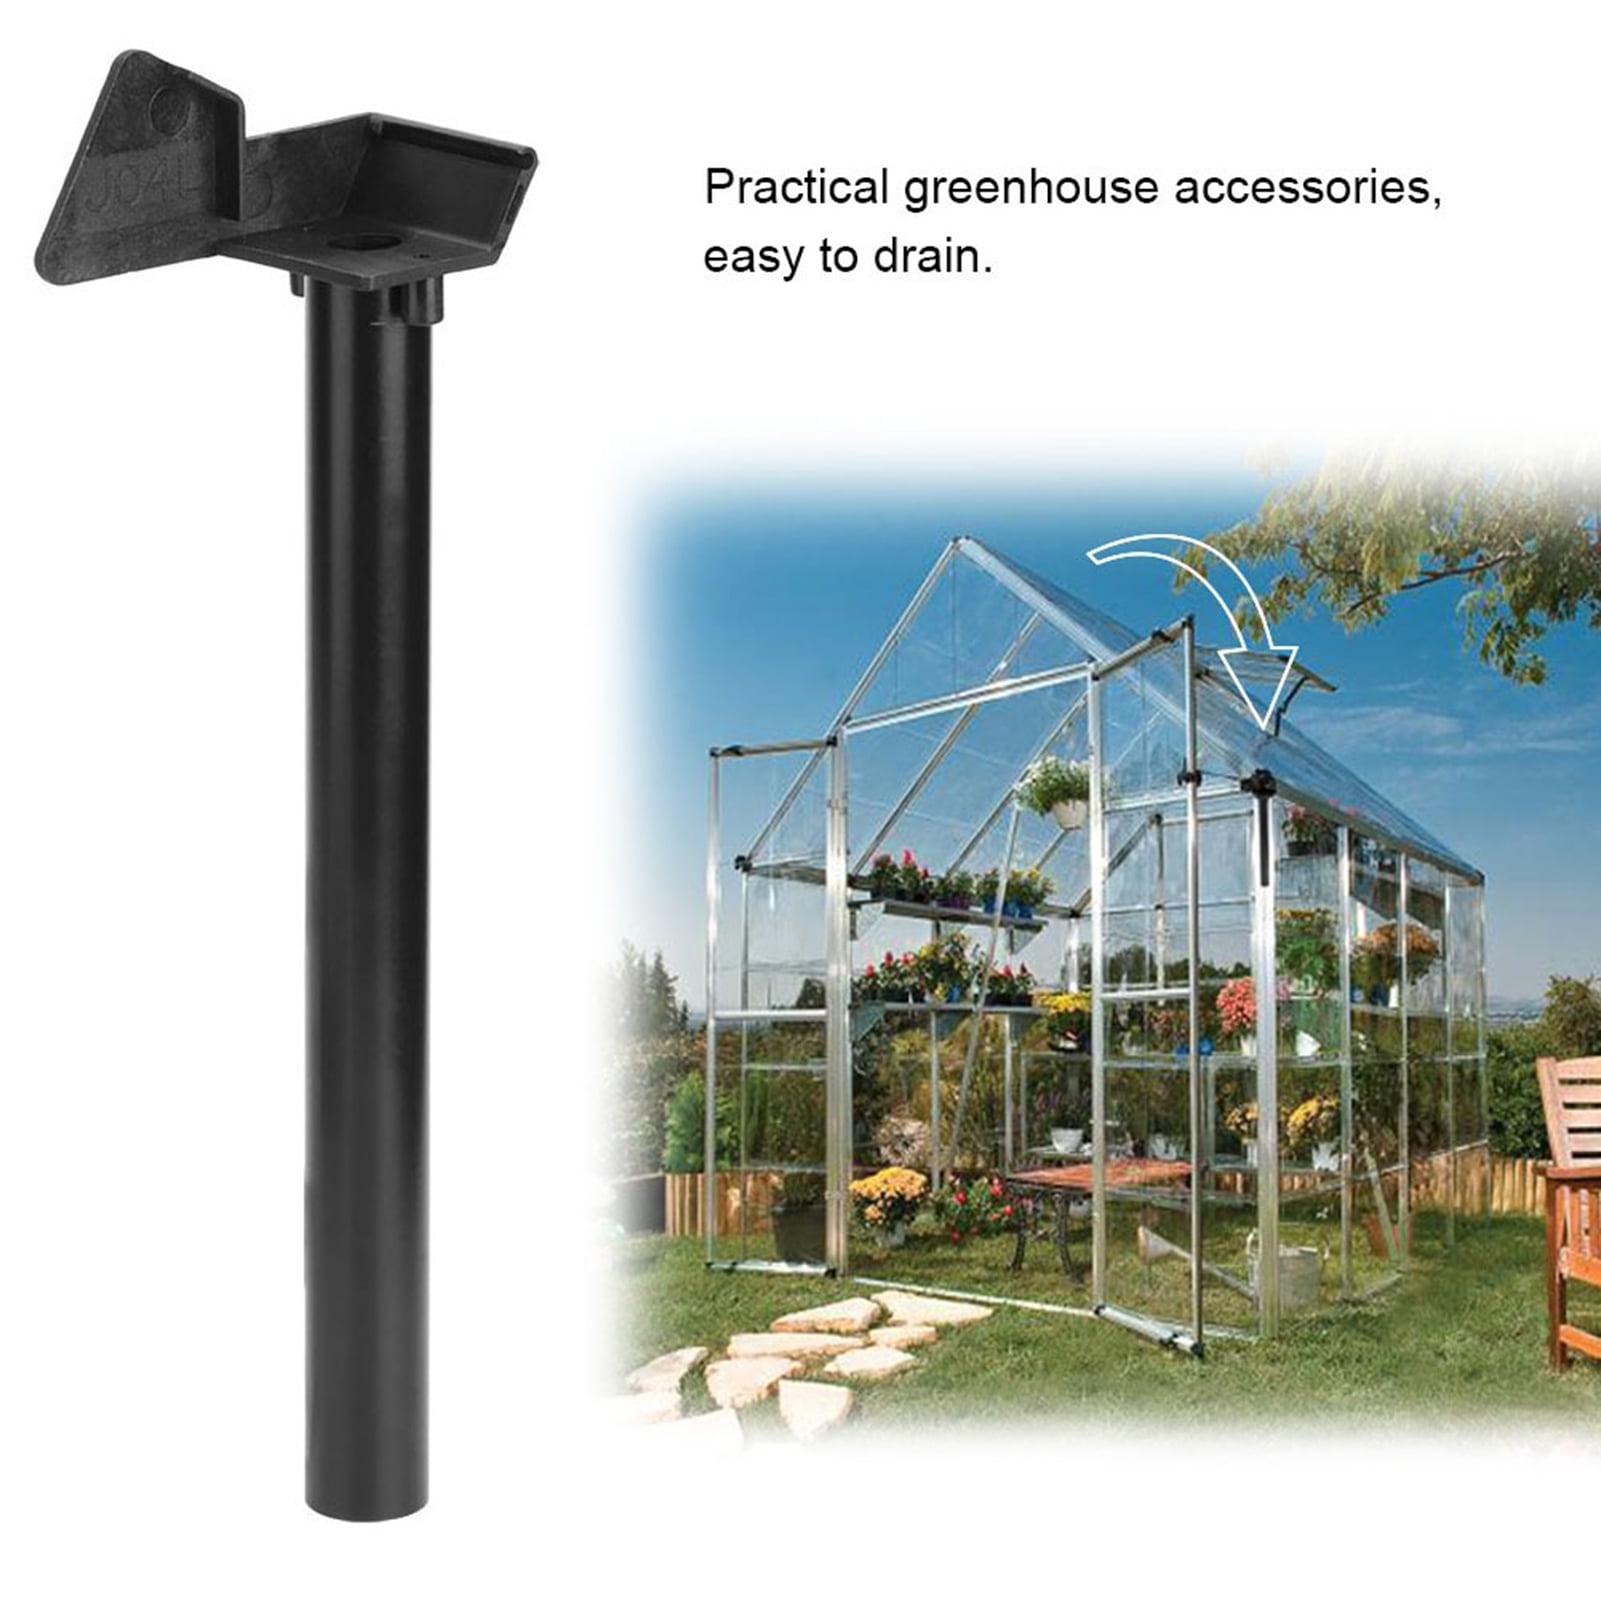 2 Greenhouse Rainwater Guttering Kits Down Pipe Water Butt Shed Gutter Fits 14mm